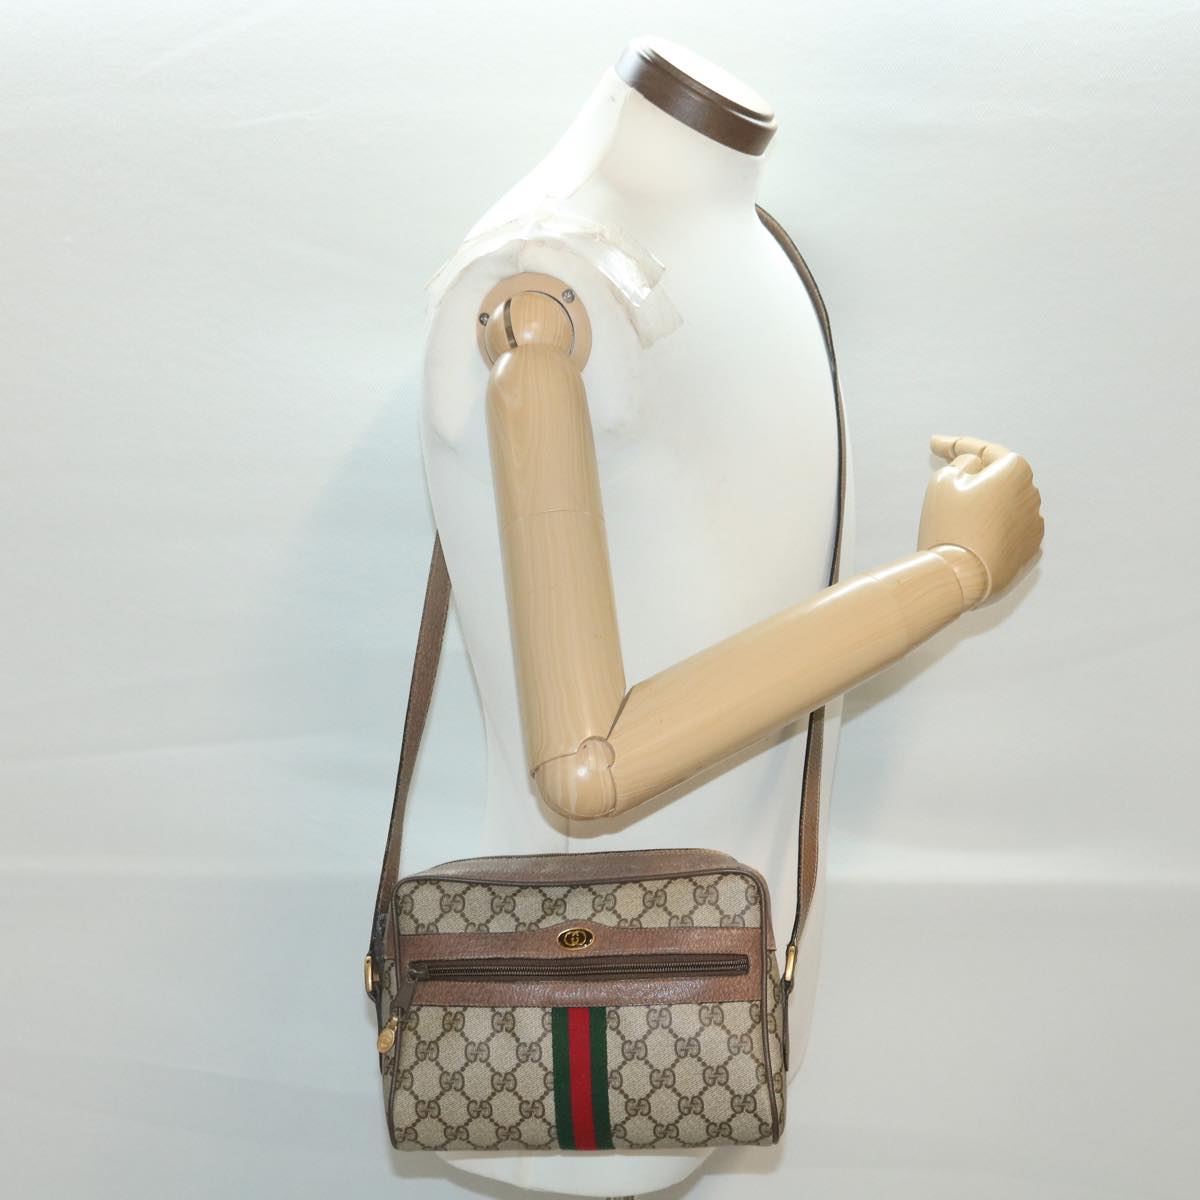 GUCCI GG Canvas Web Sherry Line Shoulder Bag Beige Red 98 02 004 Auth 38305